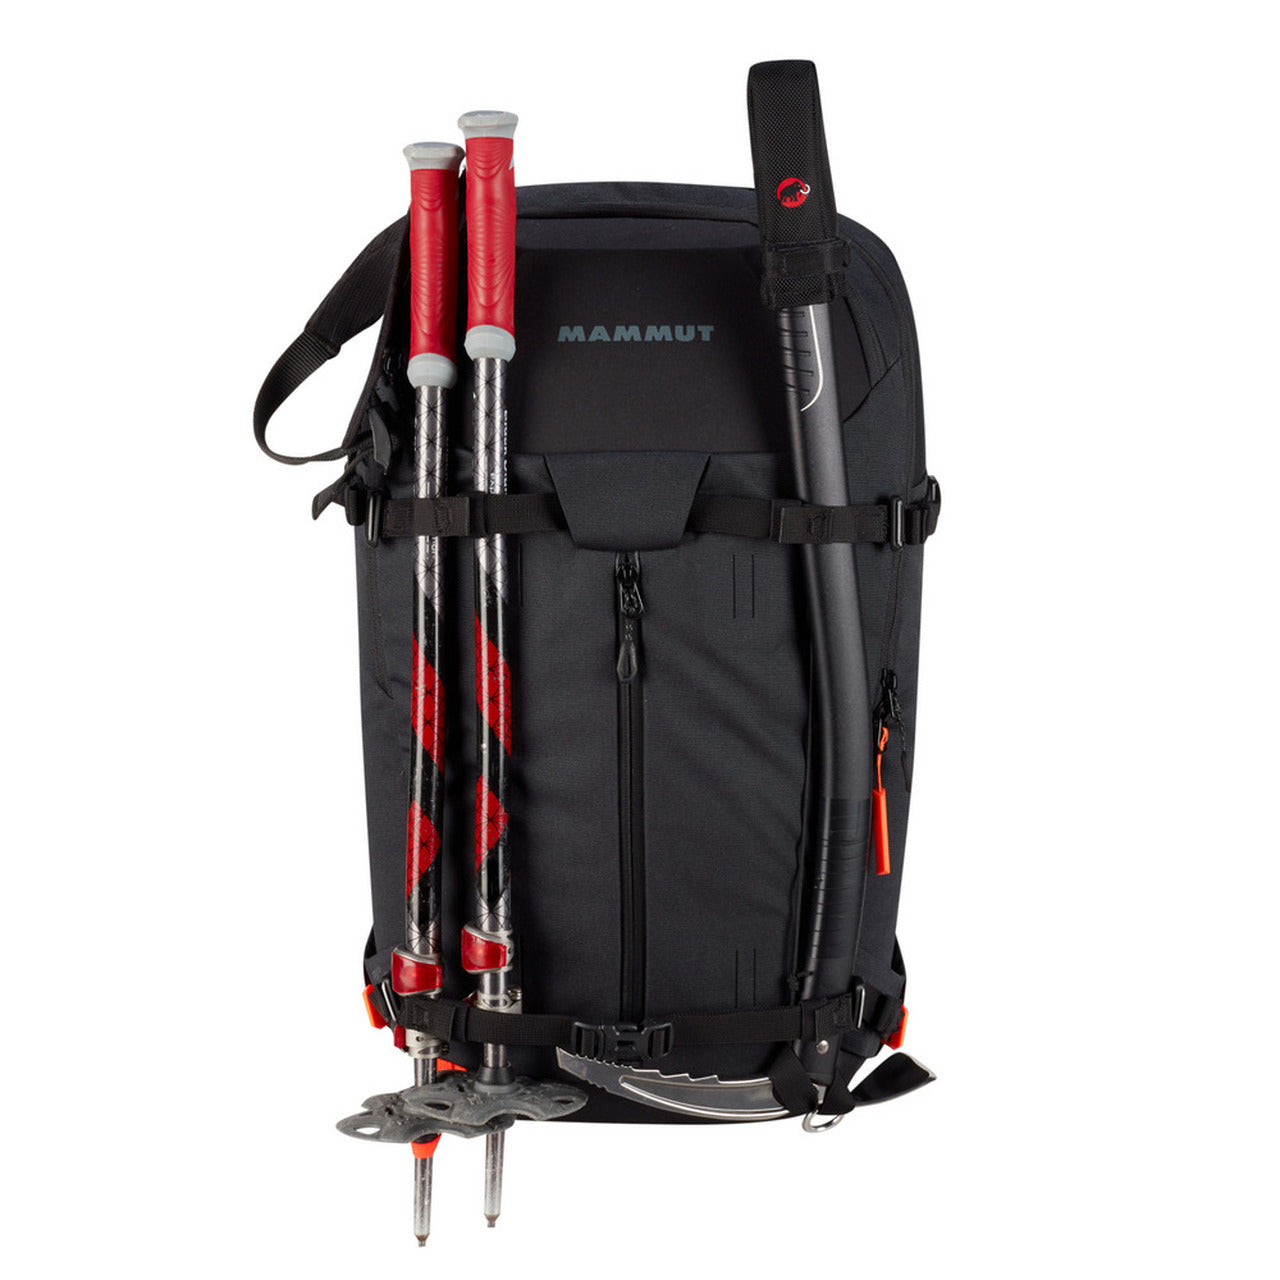 Mammut Pro X Removable Airbag Pack 35 Liter